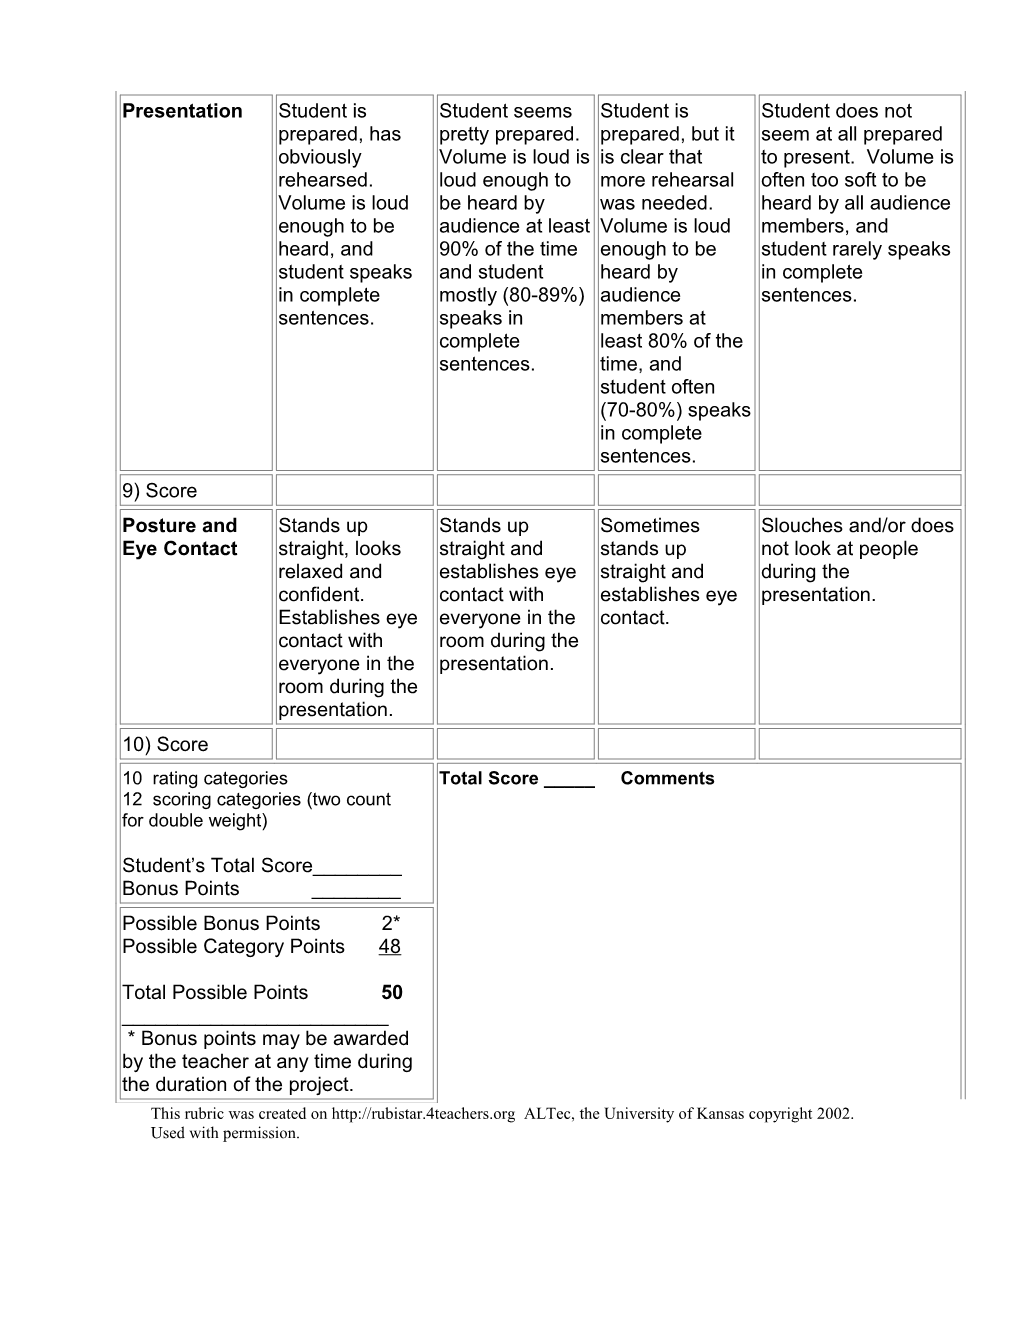 This Rubric Was Created on Altec, the University of Kansas Copyright 2002. Used with Permission